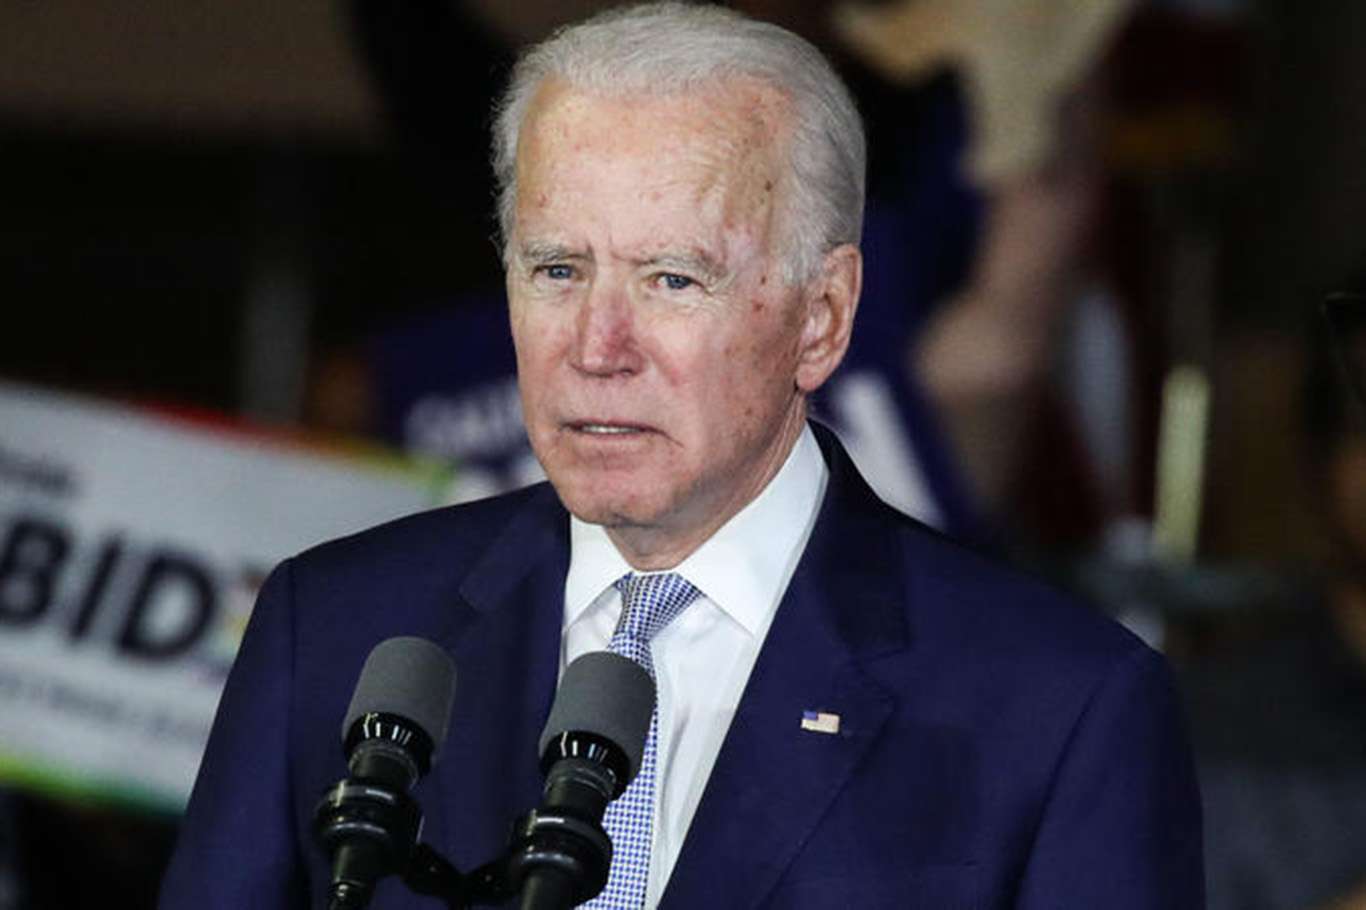 Biden: Putin is a killer and will pay a price for interfering in U.S. elections